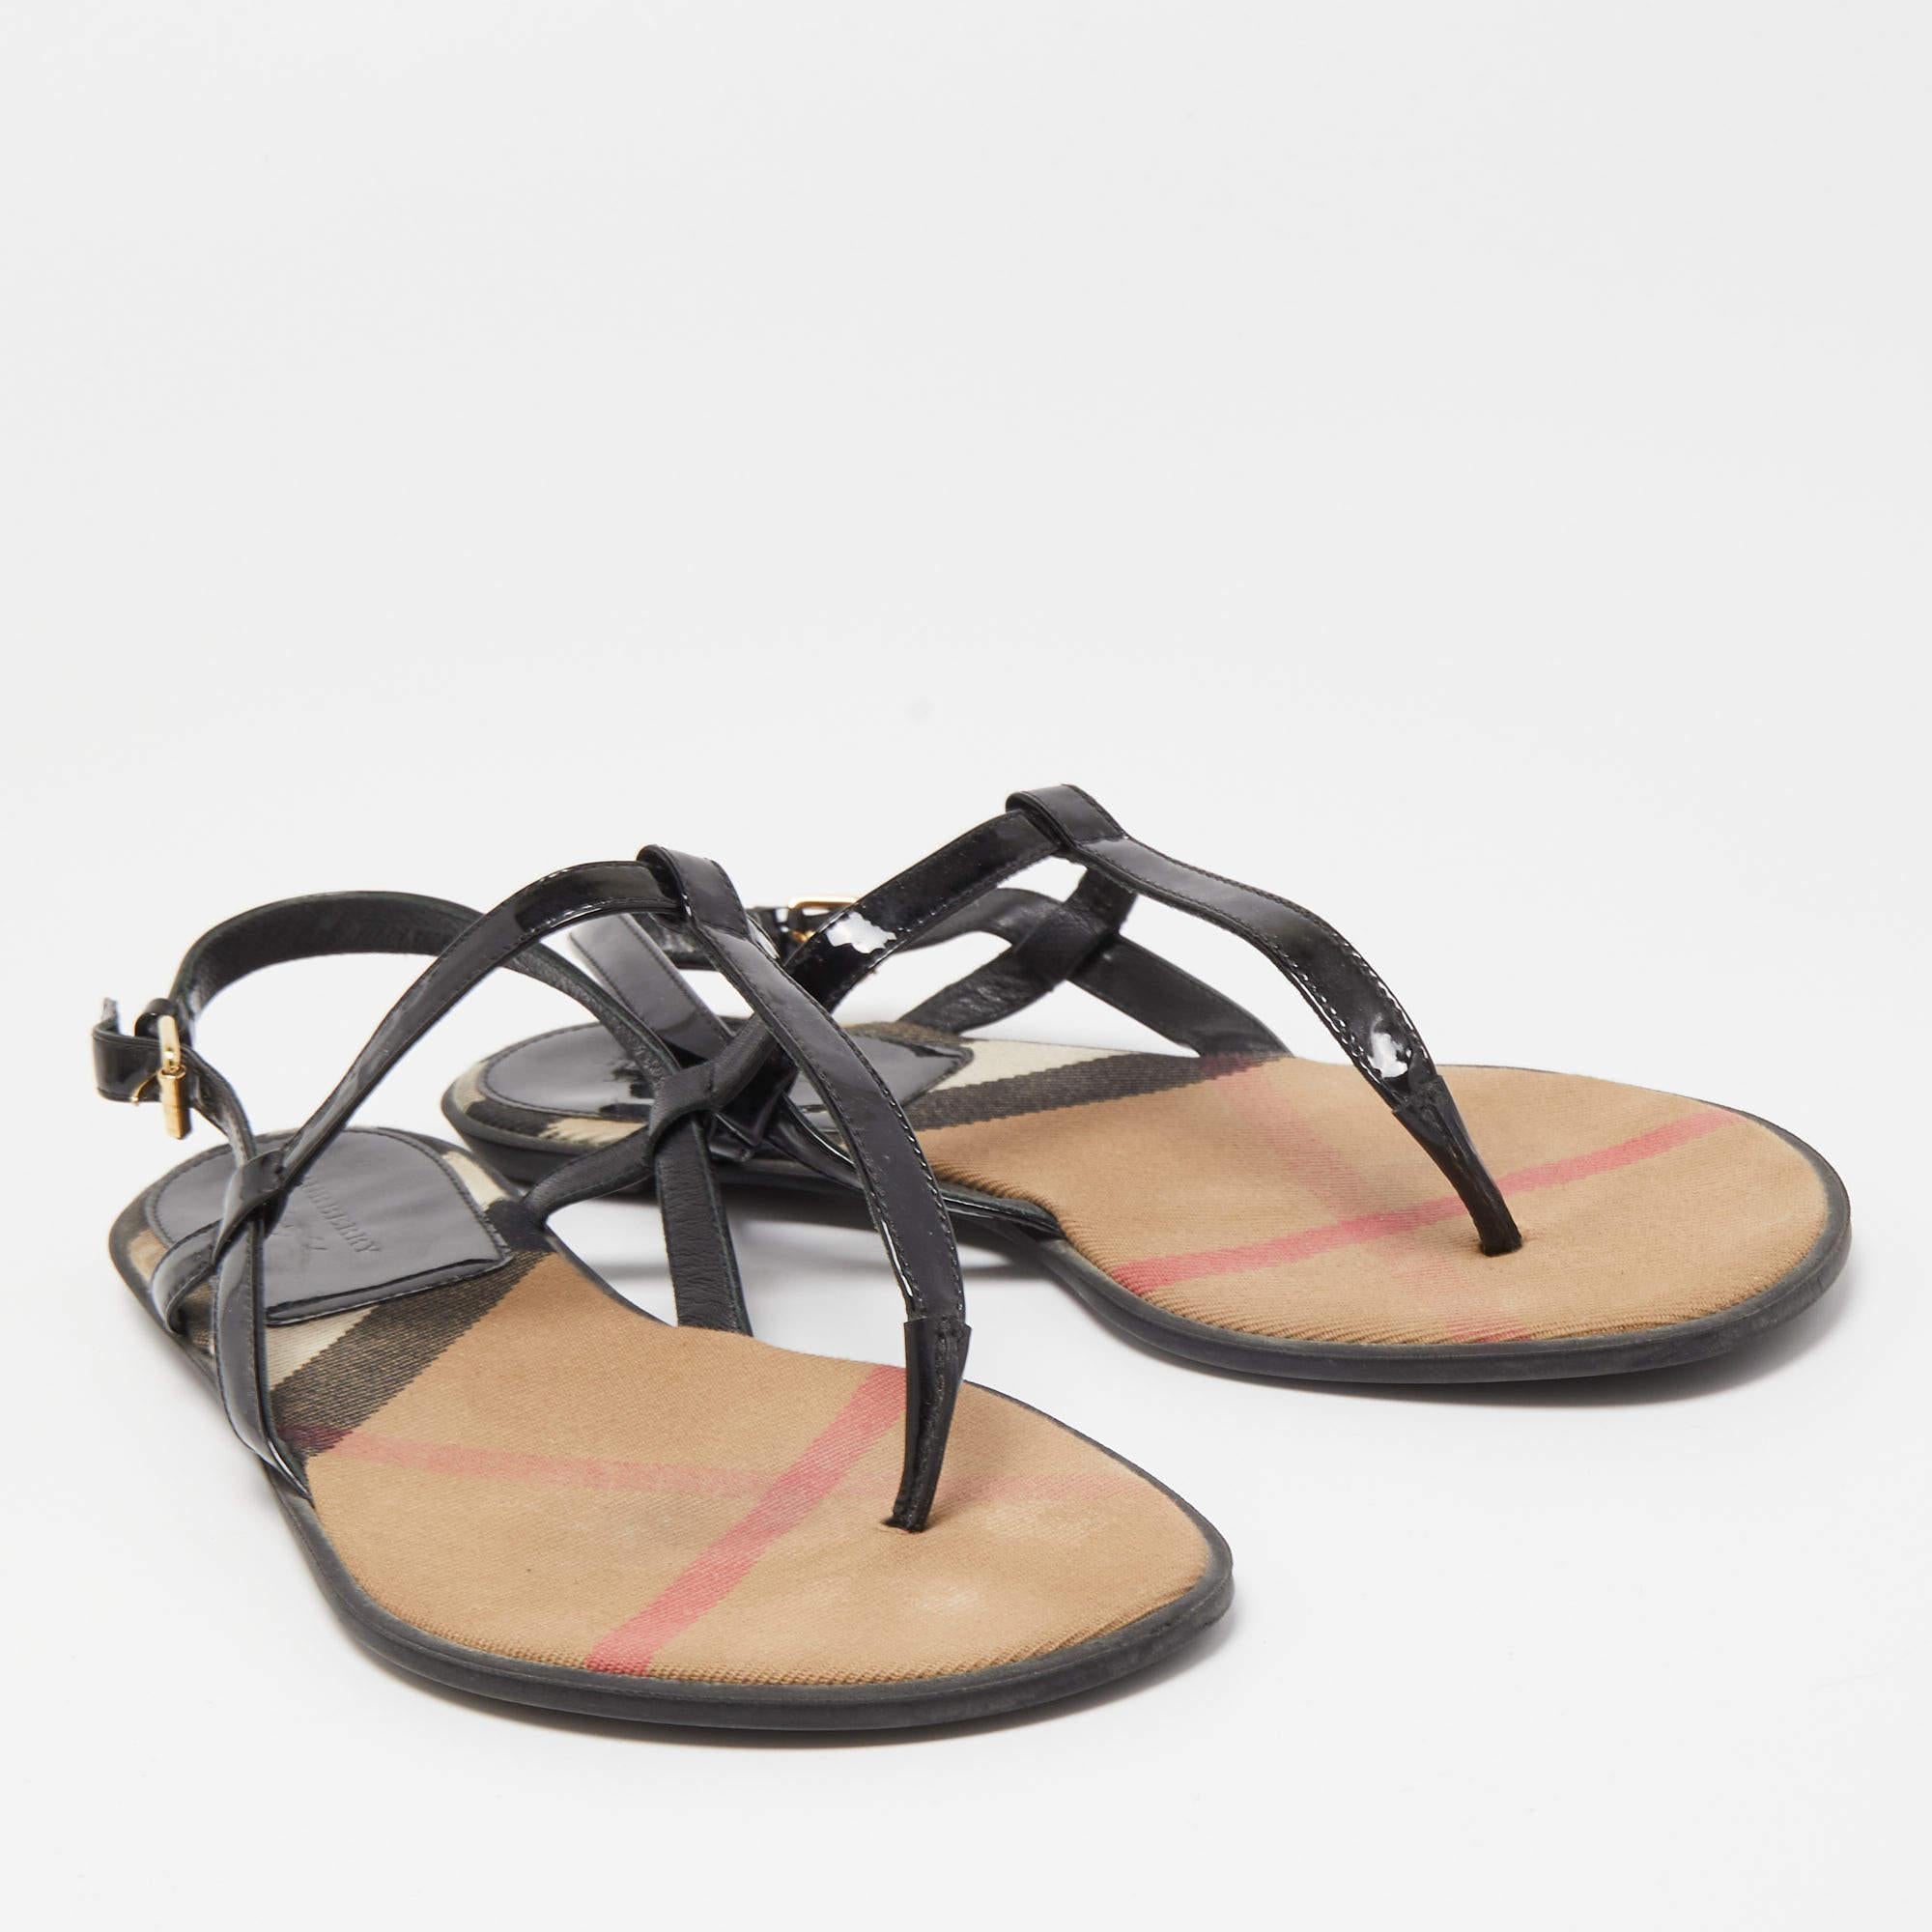 Women's Burberry Black Patent Leather Thong Flat Sandals Size 36